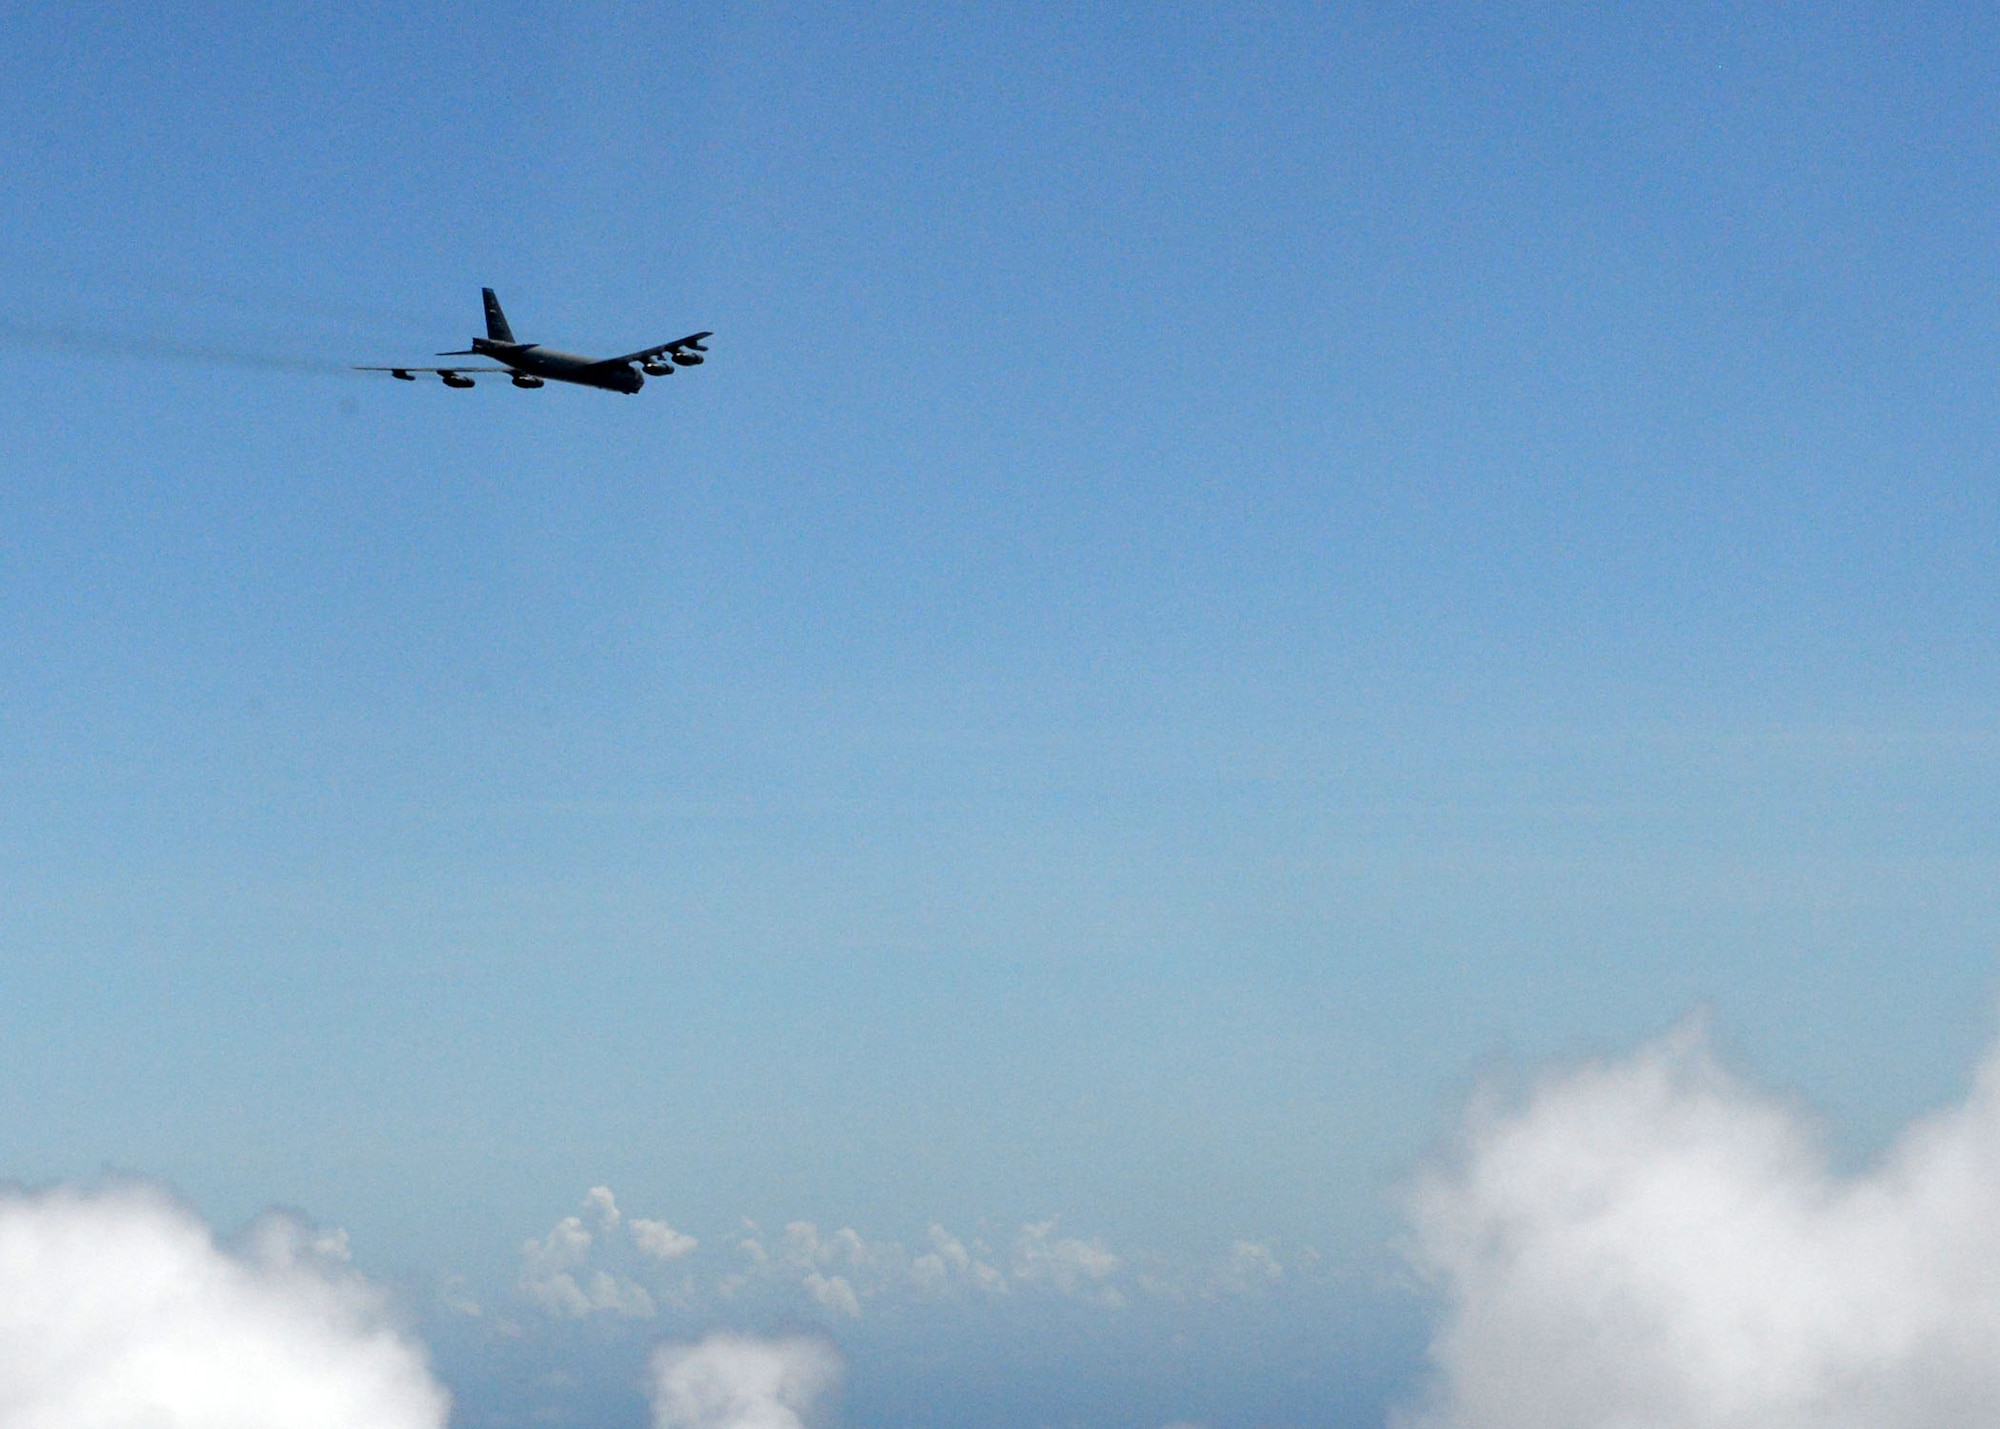 A U.S. Air Force B-52 Stratofortress from the 20th Expeditionary Bomb Squadron, flies over the Pacific Ocean June 26, 2015. Airmen from the 20th EBS dropped the final M117 bomb in the Pacific Air Force’s inventory June 26 on an uninhabited island off the coast of Guam as part of a training mission to ensure the security and stability of the Indo-Asia-Pacific region. (U.S. Air Force photo by Airman 1st Class Joshua Smoot/Released)
